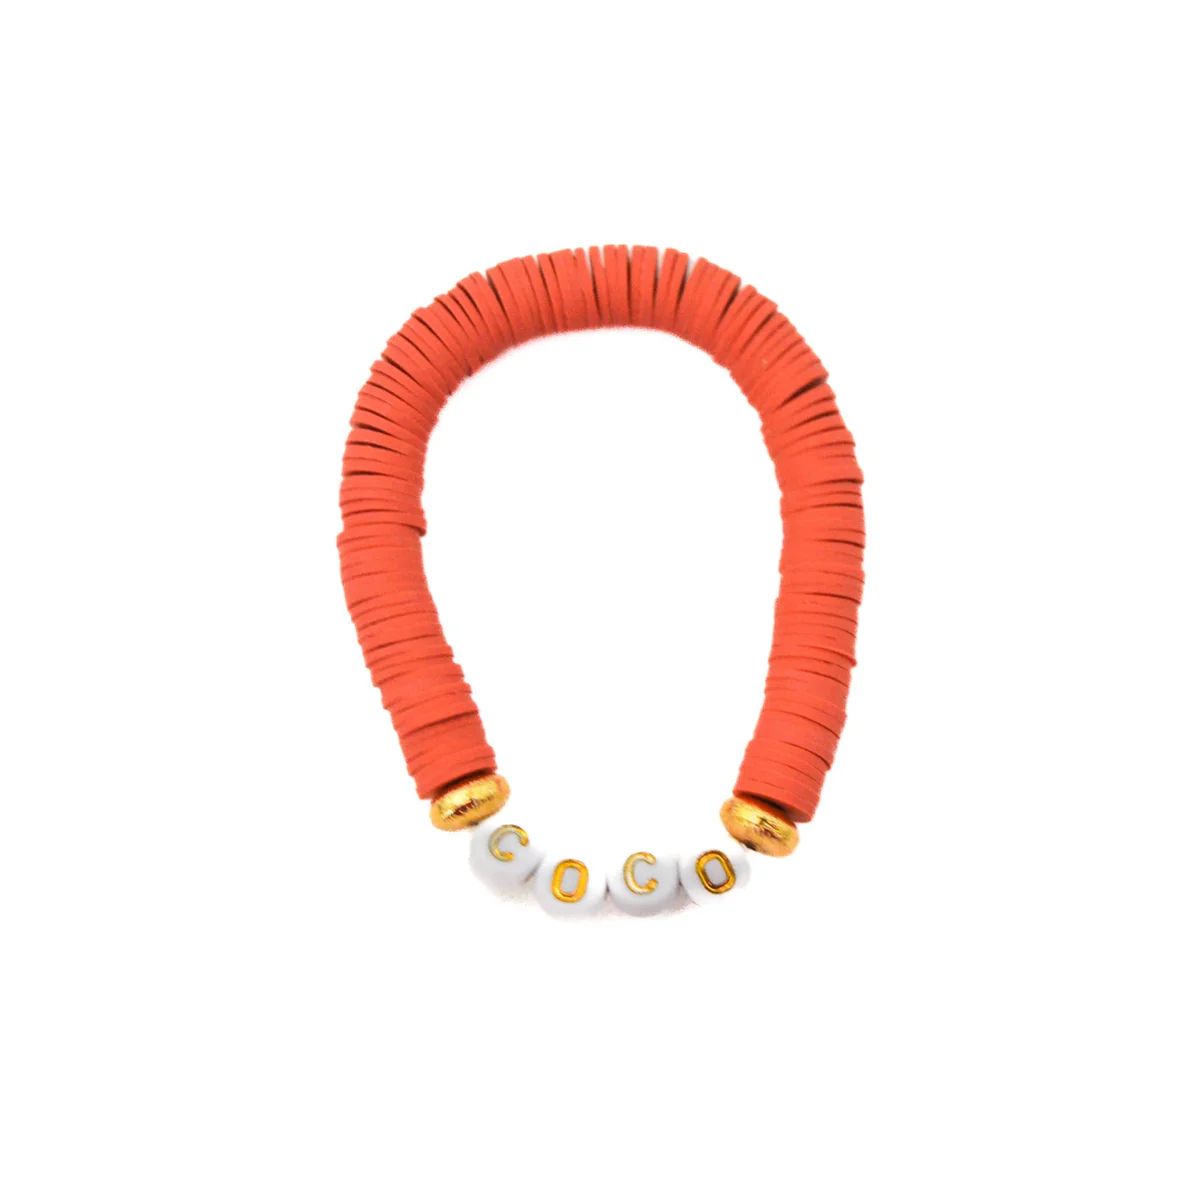 The Burnt Orange Colette | Cocos Beads and Co